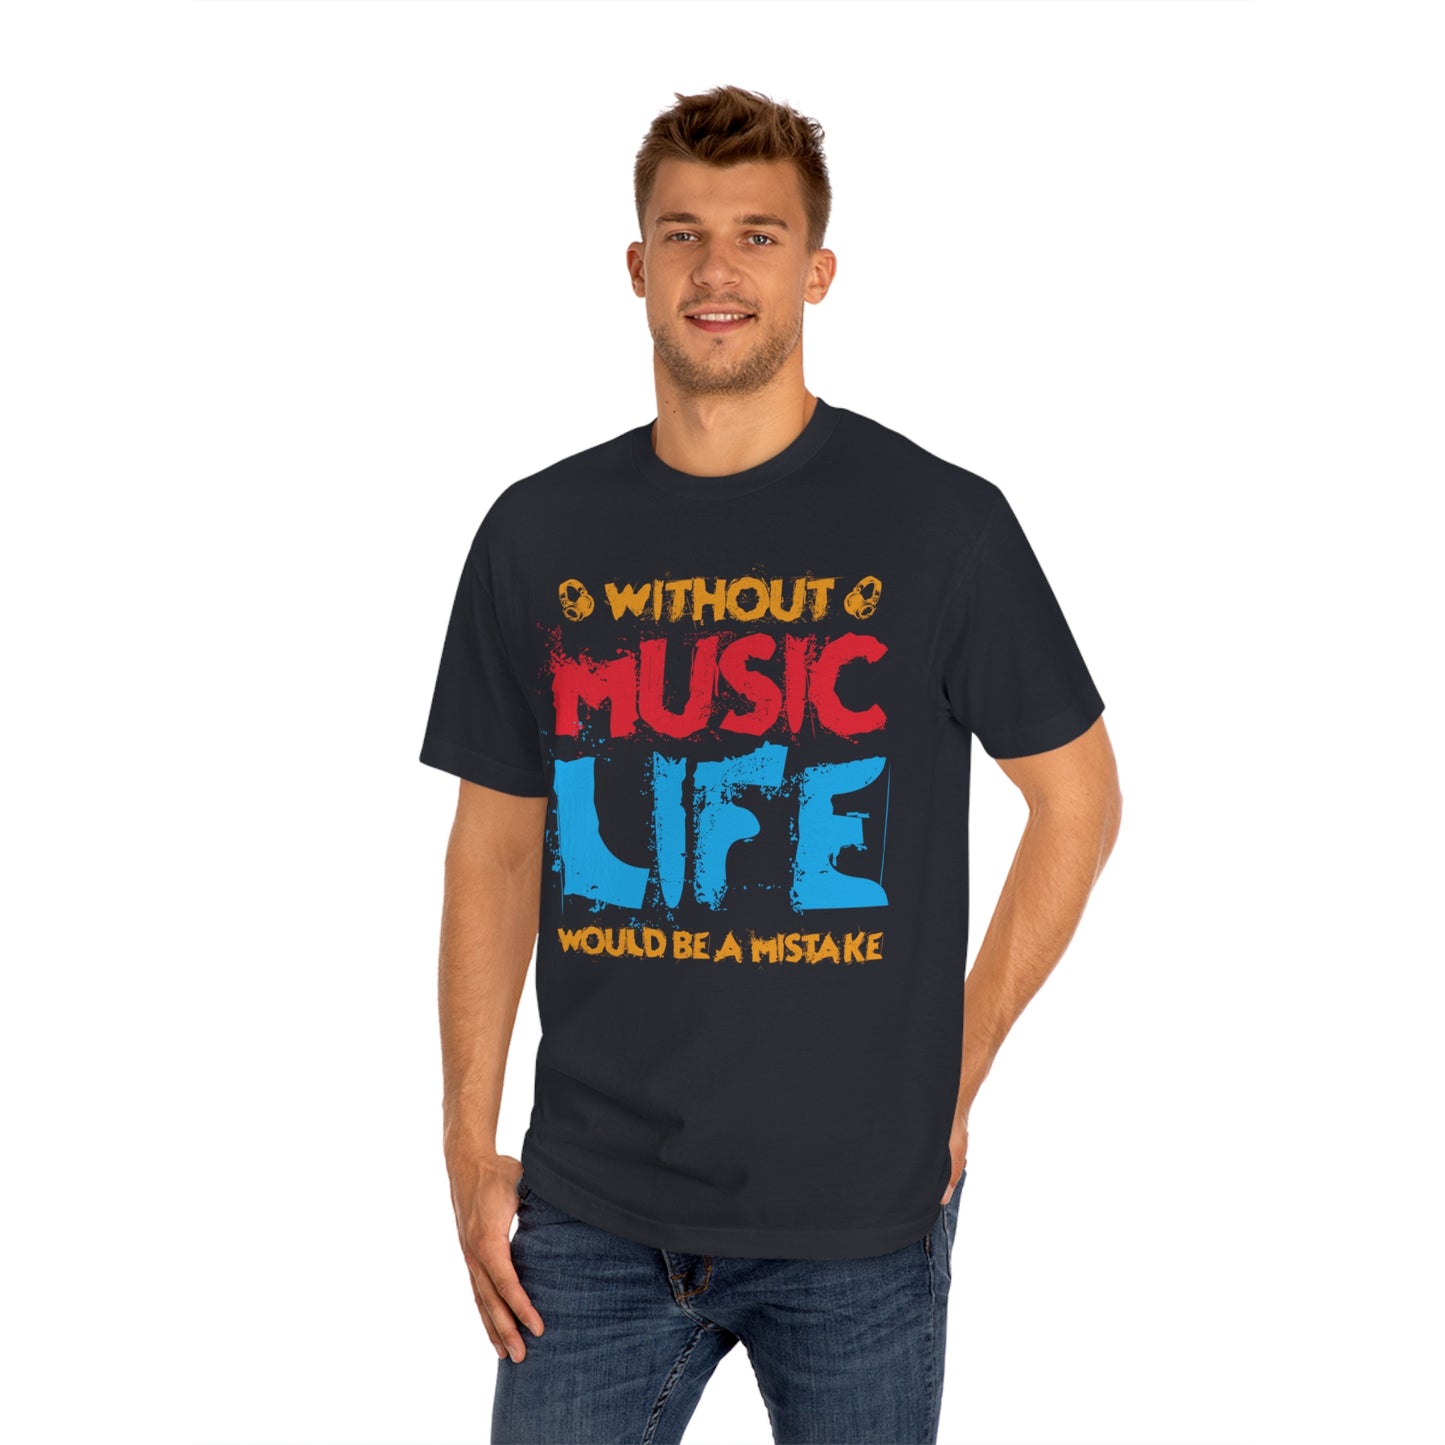 Without music life would be a mistake Unisex Classic Tee